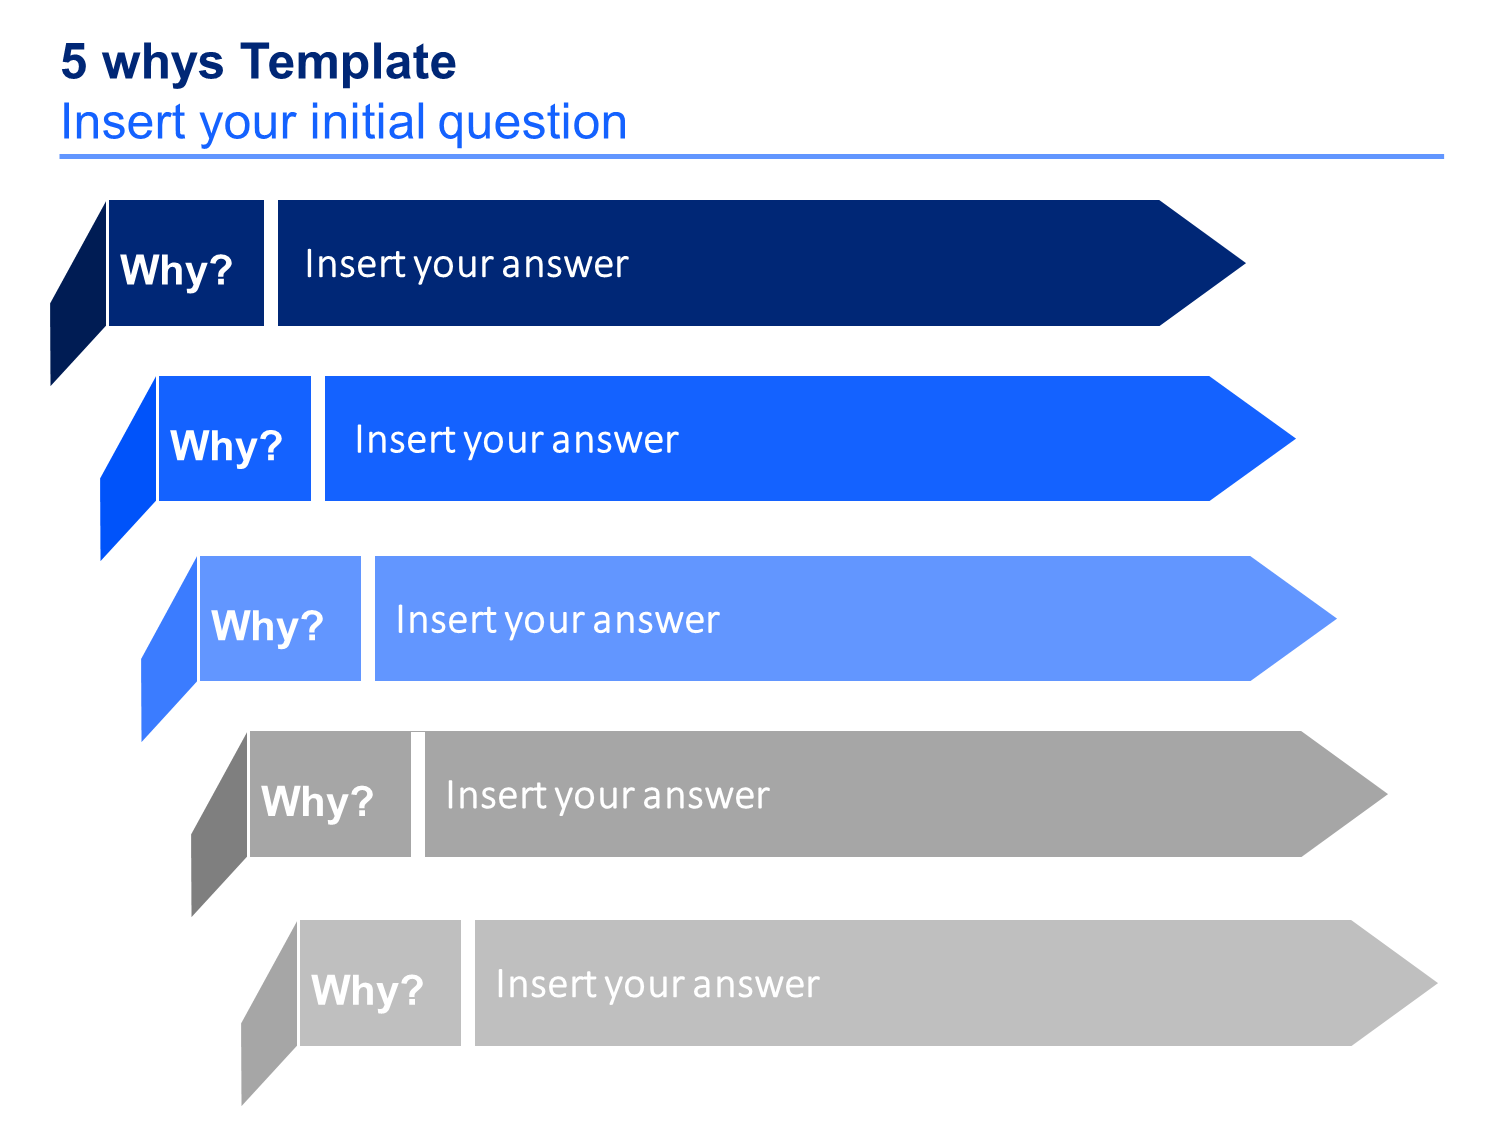 Image Result For 5 Whys Template Strategy Tools Management Tool 5 Whys